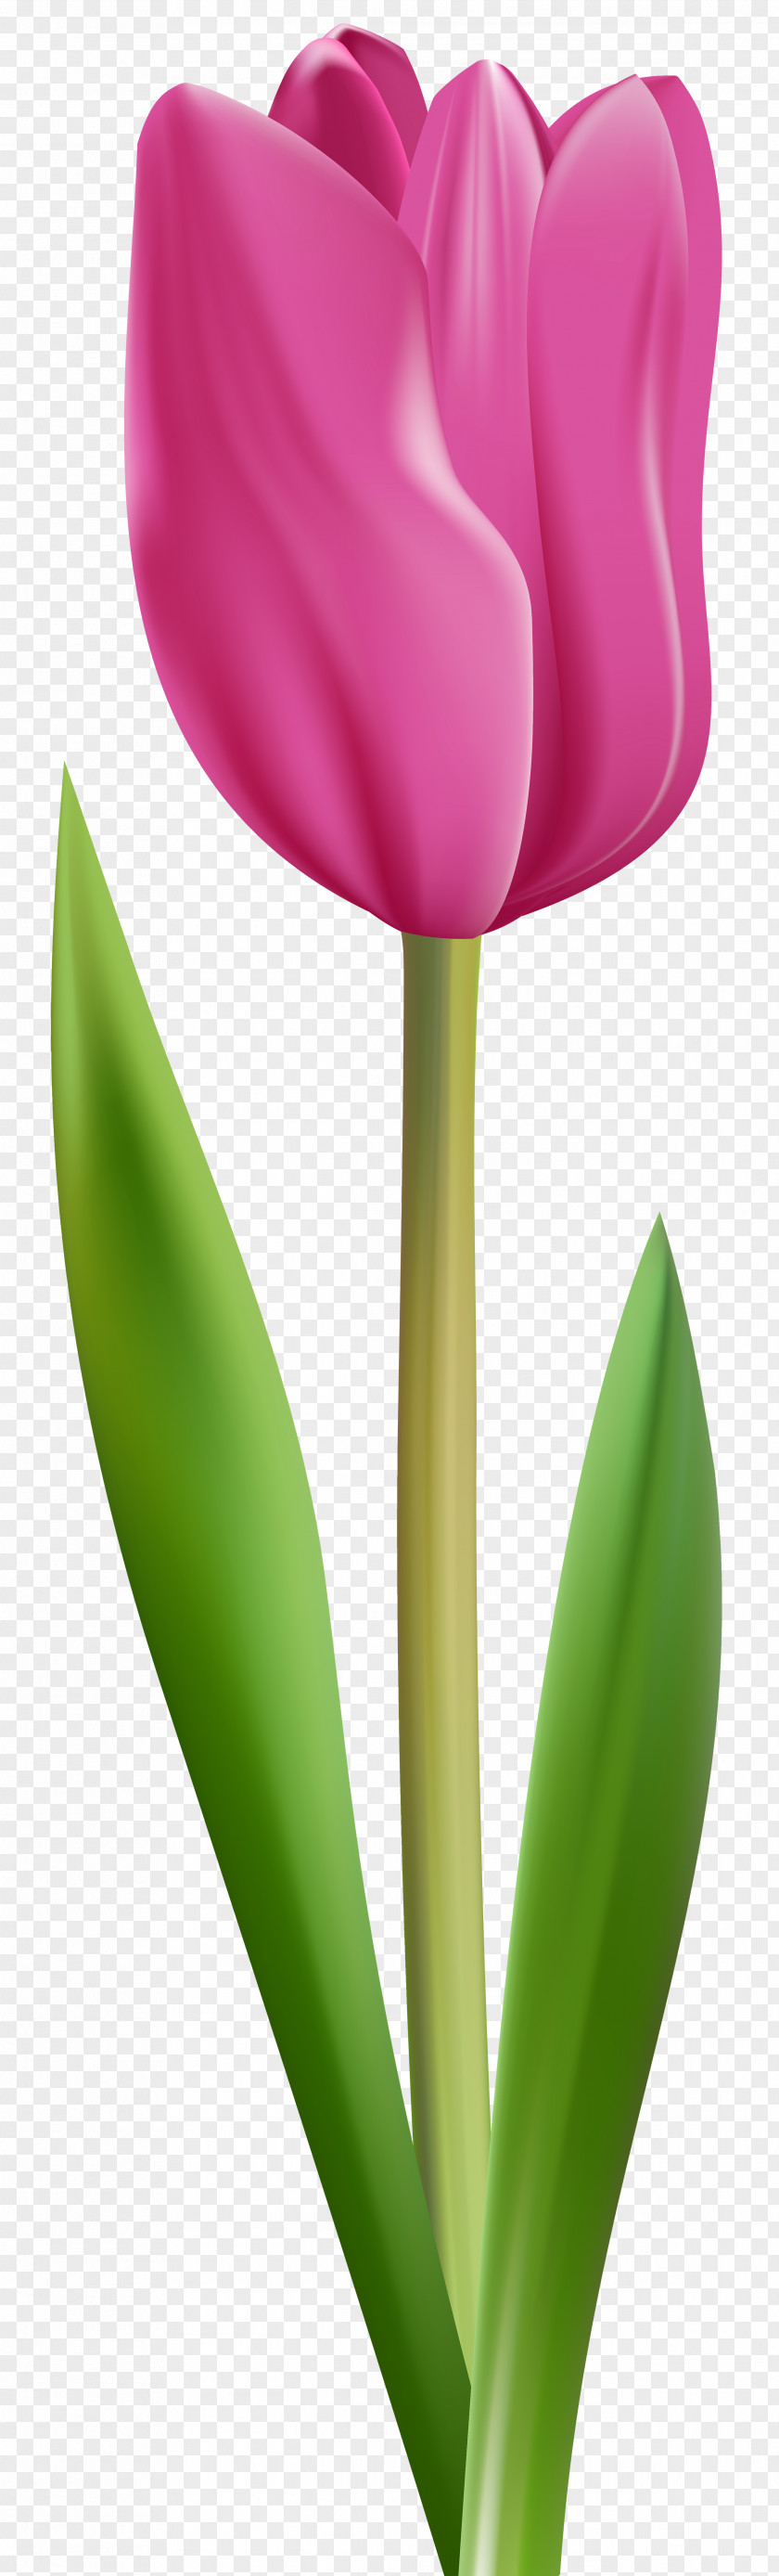 Mothers Day Flower Tulips Bouquet Lily Suzani Petal PNG